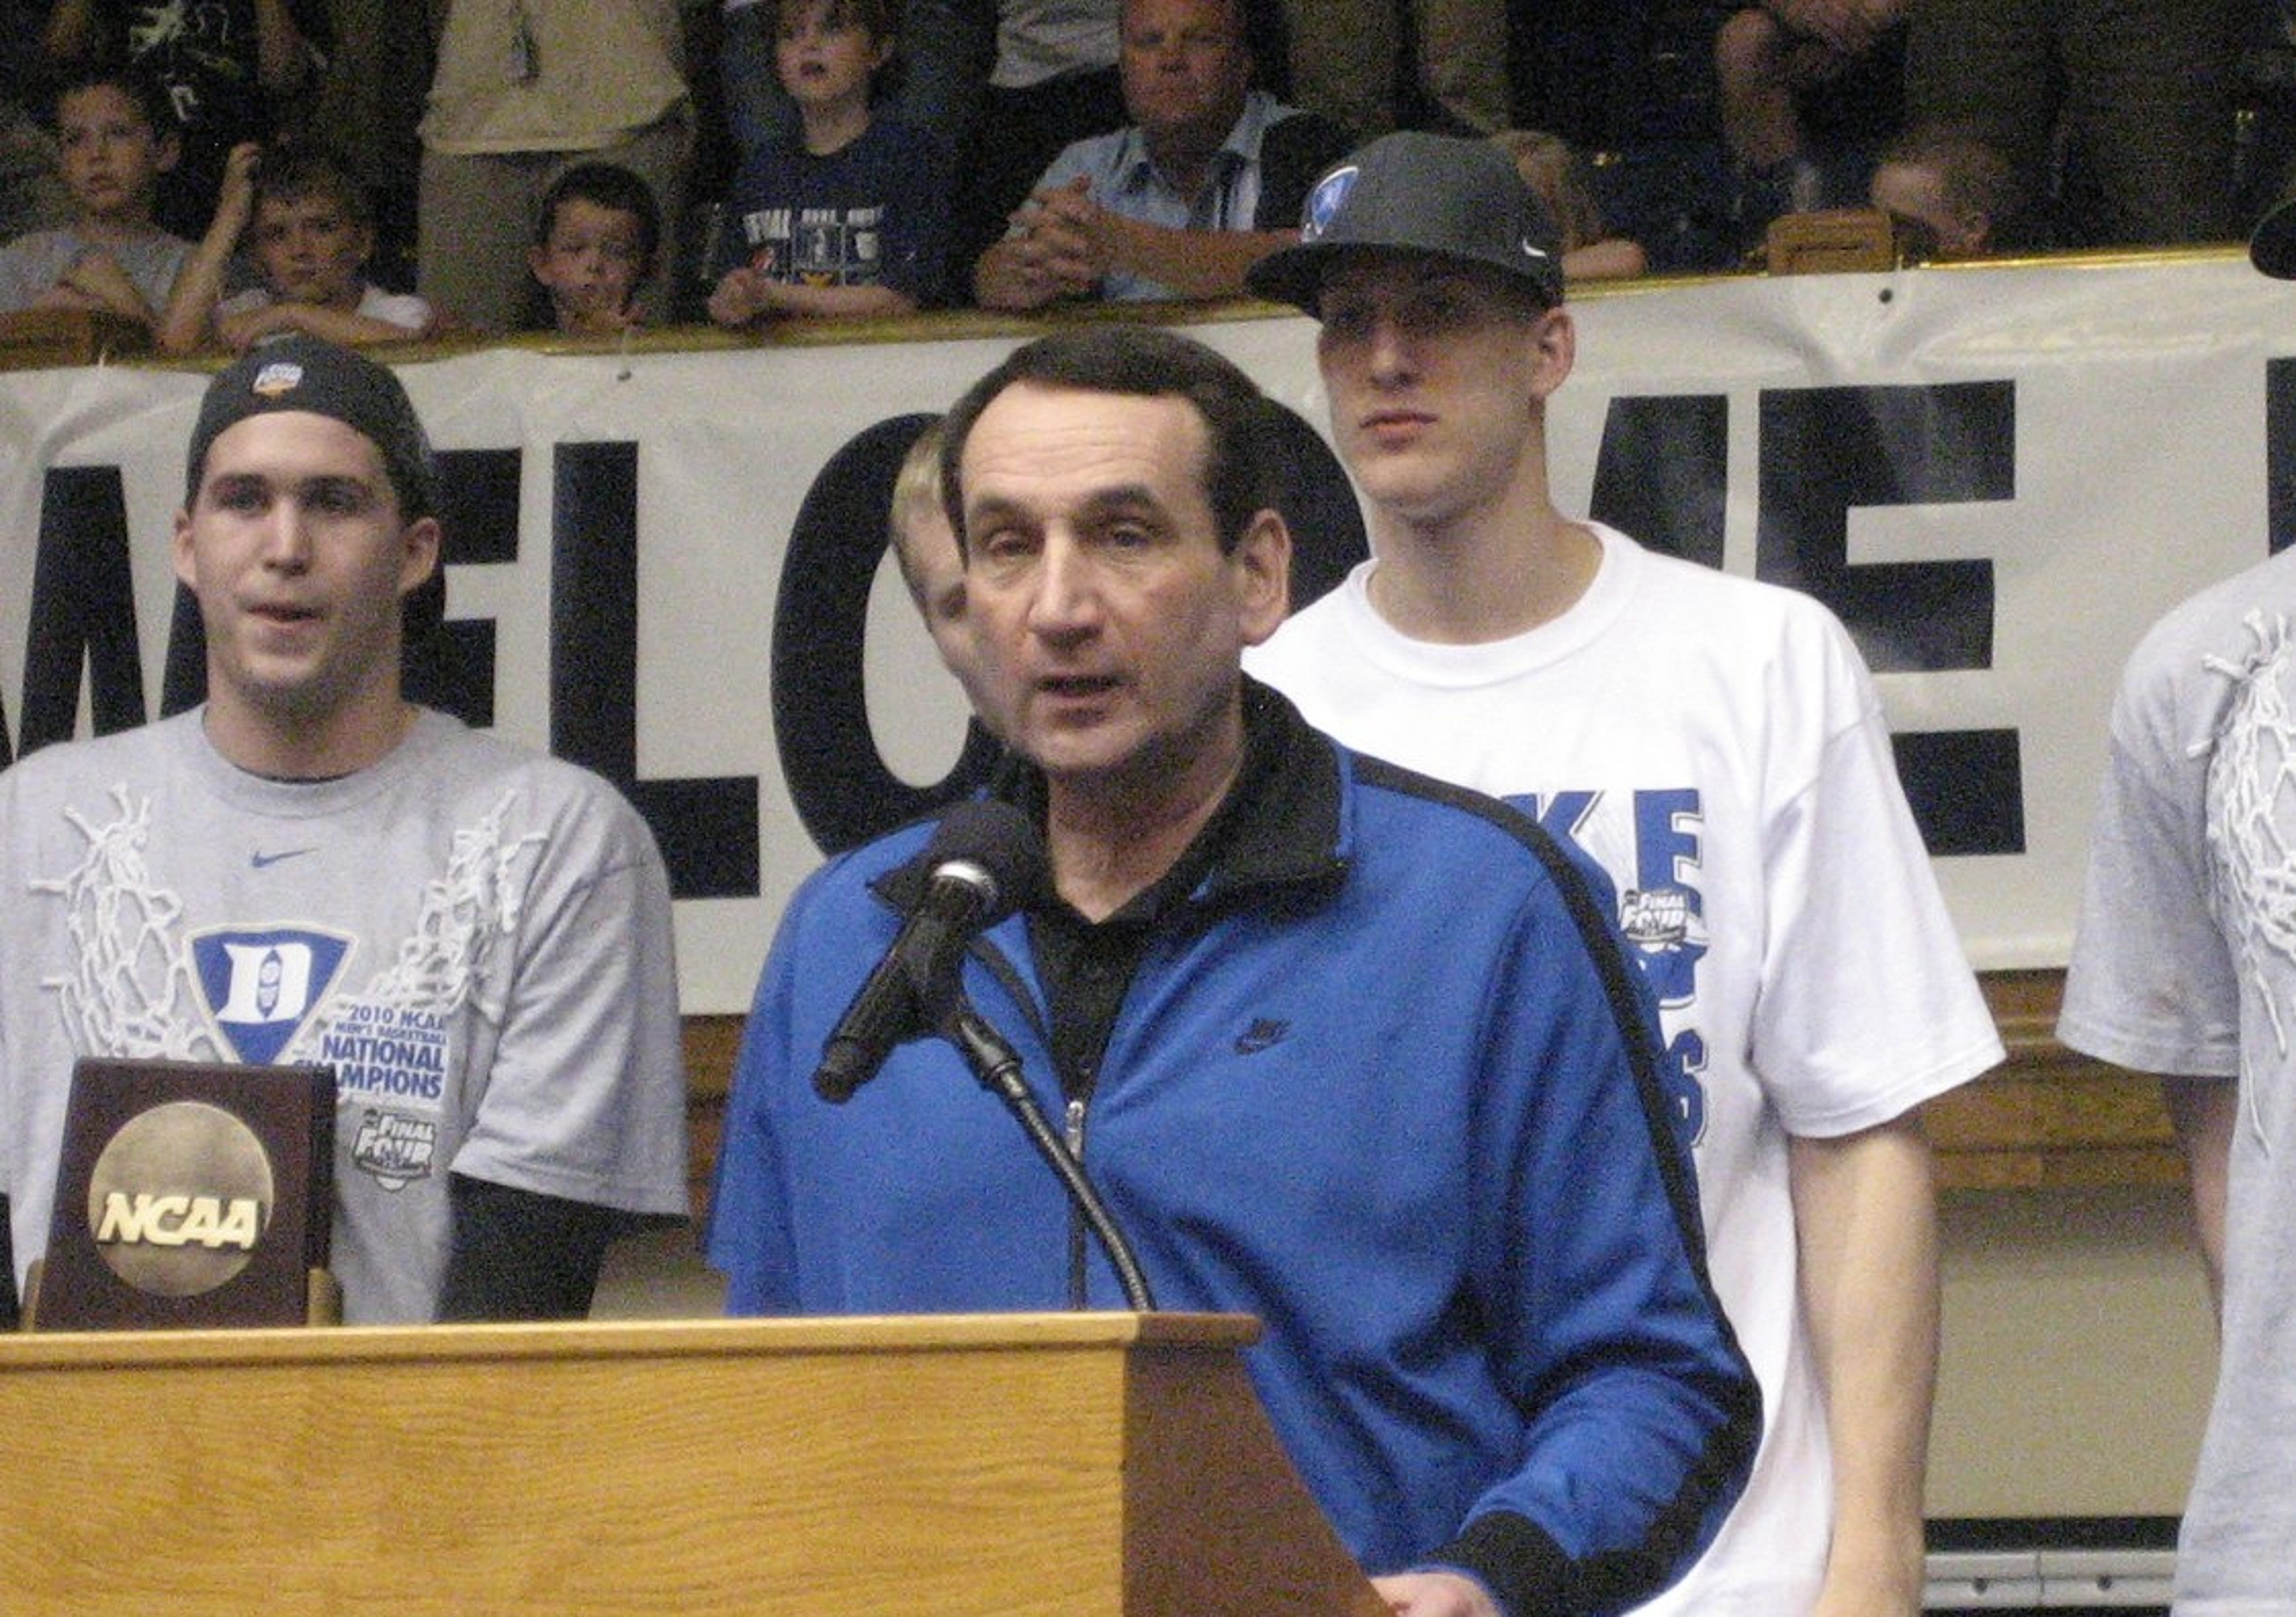 5 Things You Might Not Know About Coach K (Mike Krzyzewski)